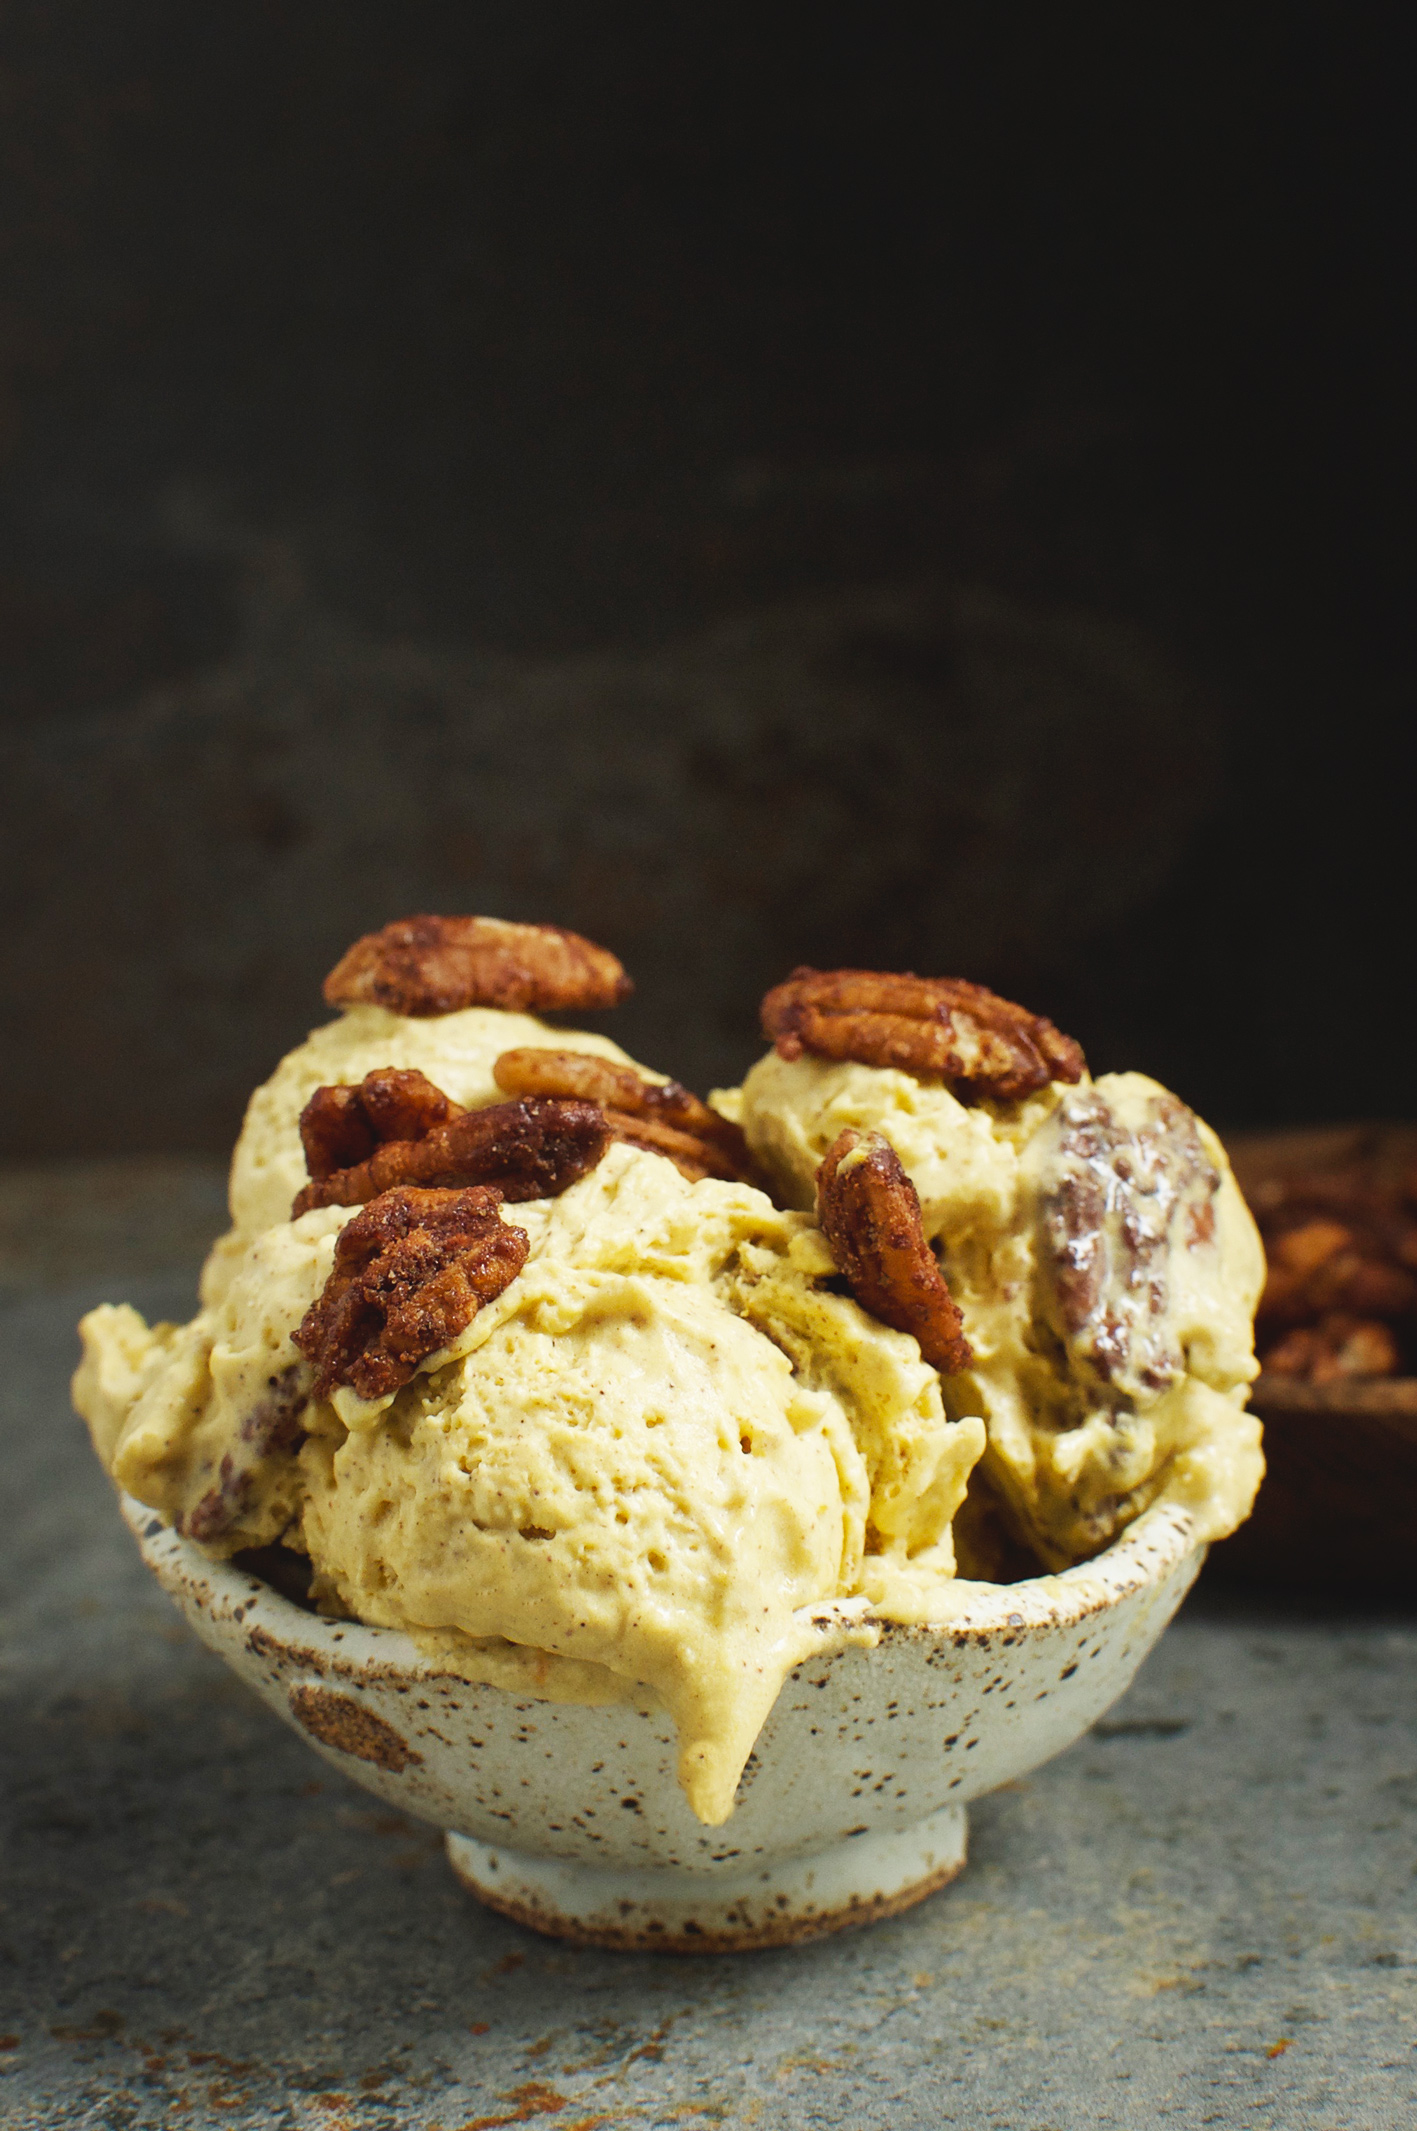 This Low-Carb Candied Pecan Pumpkin Ice-Cream recipe makes a delicious dessert. This recipe can be part of a low-carb, ketogenic, Atkins, gluten-free, grain-free, diabetic, and Banting diets.